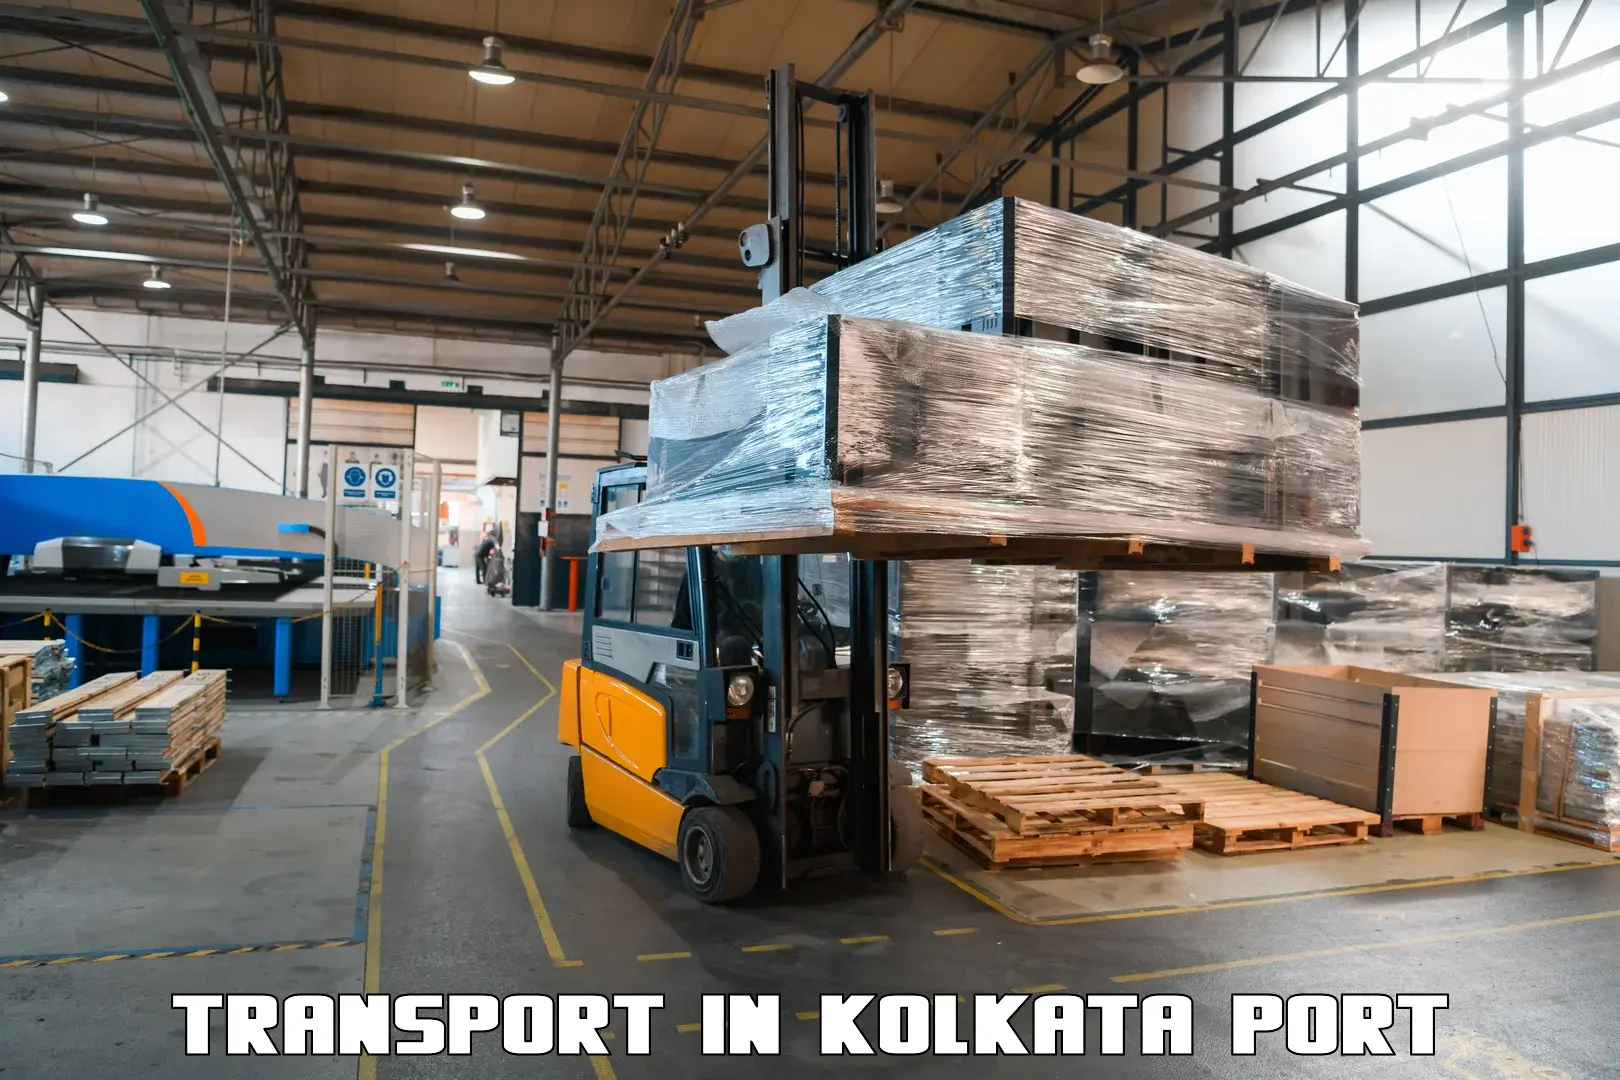 Package delivery services in Kolkata Port